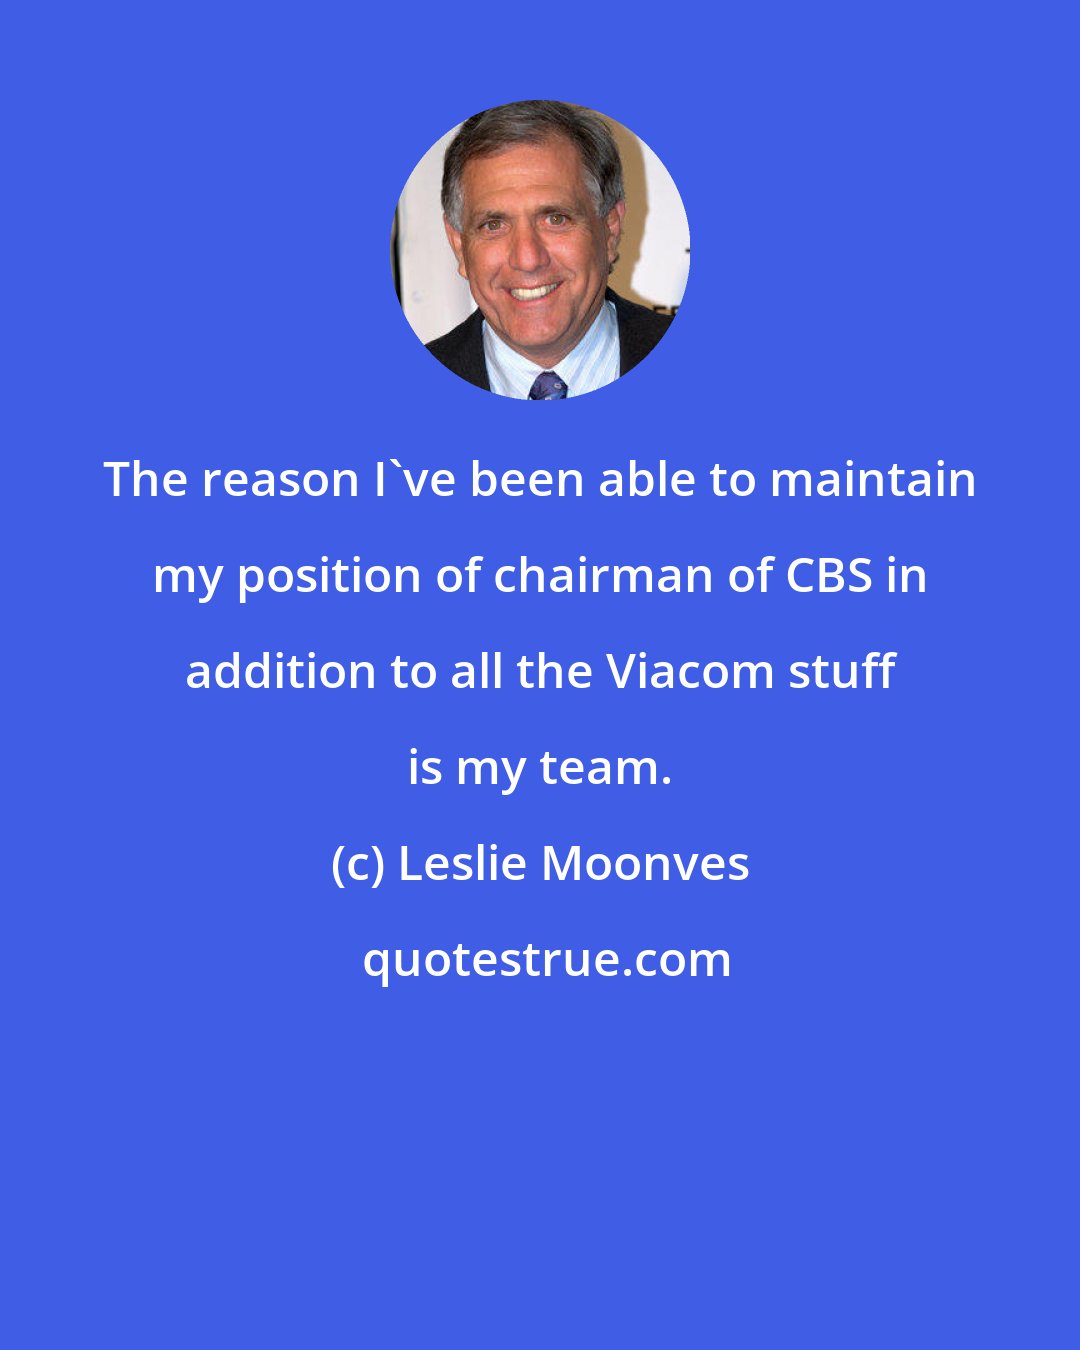 Leslie Moonves: The reason I've been able to maintain my position of chairman of CBS in addition to all the Viacom stuff is my team.